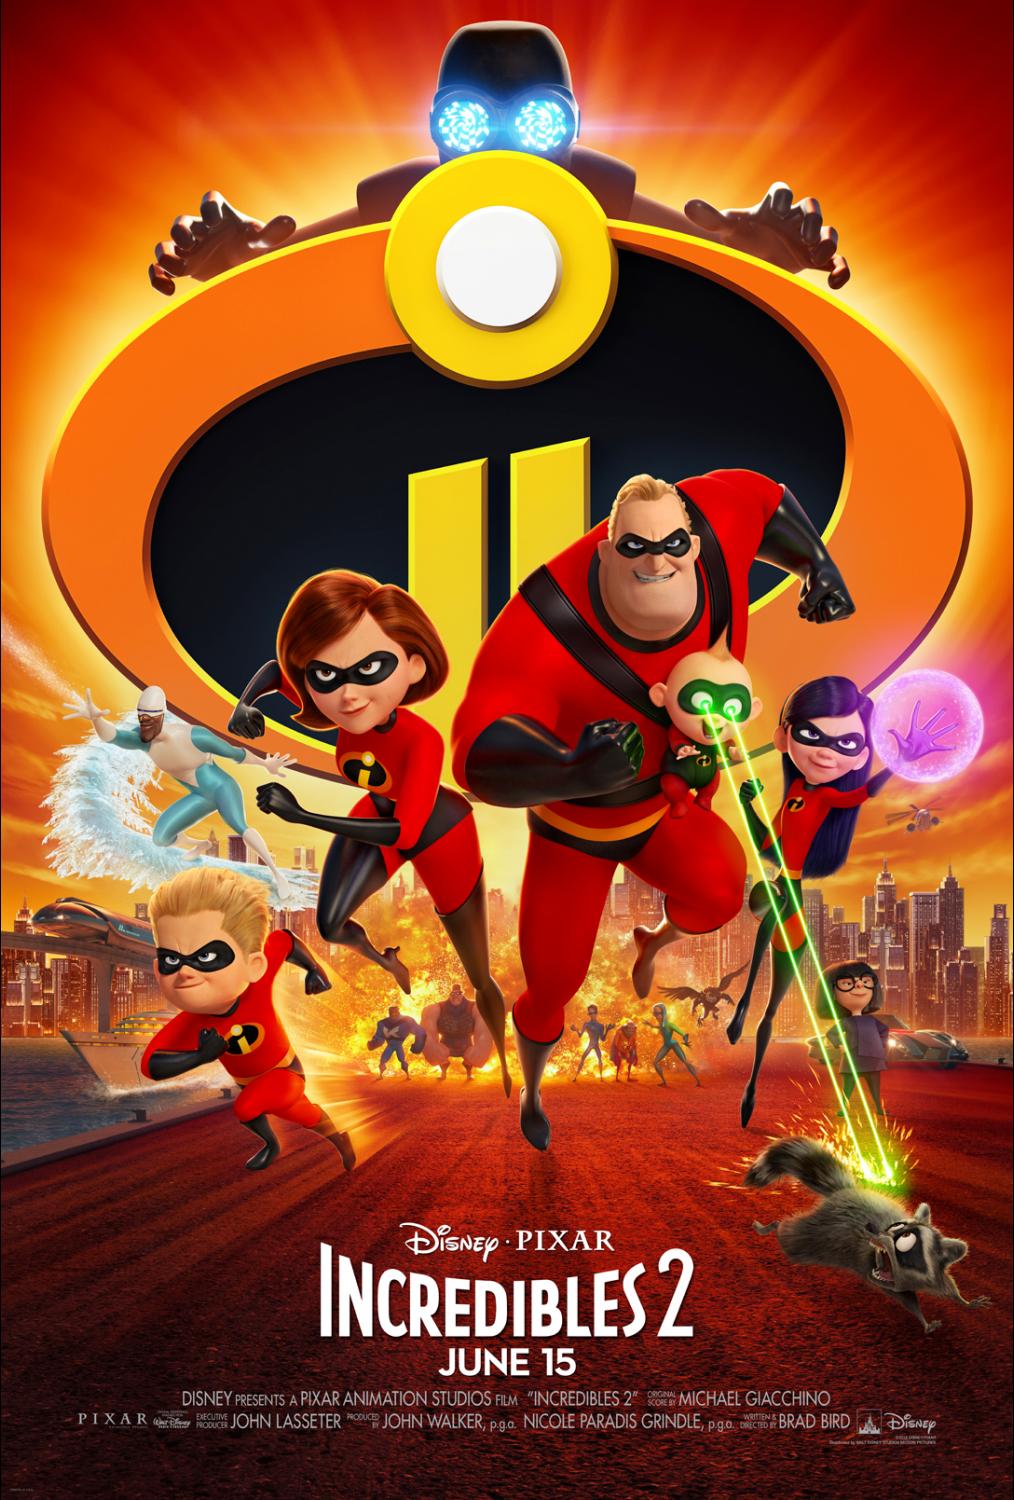 INCREDIBLES 2 GIVEAWAY AND MOVIE REVIEW